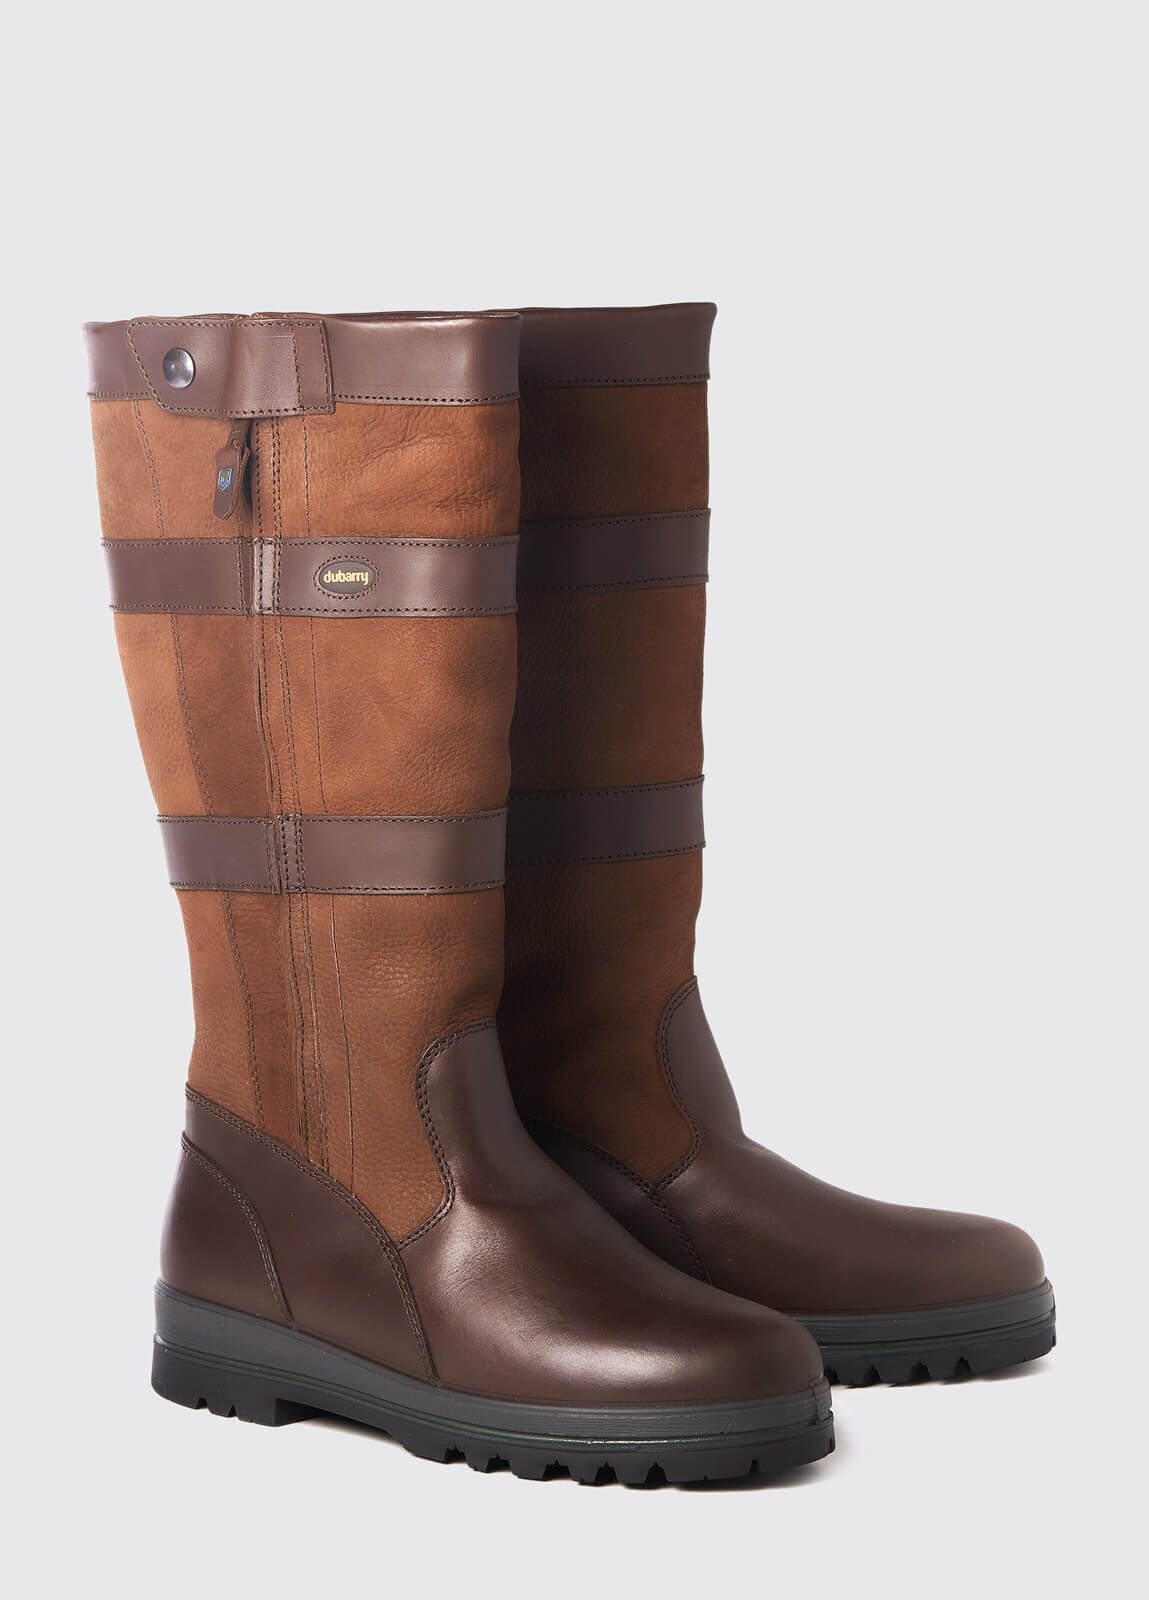 Dubarry Wexford Country Boot in Walnut